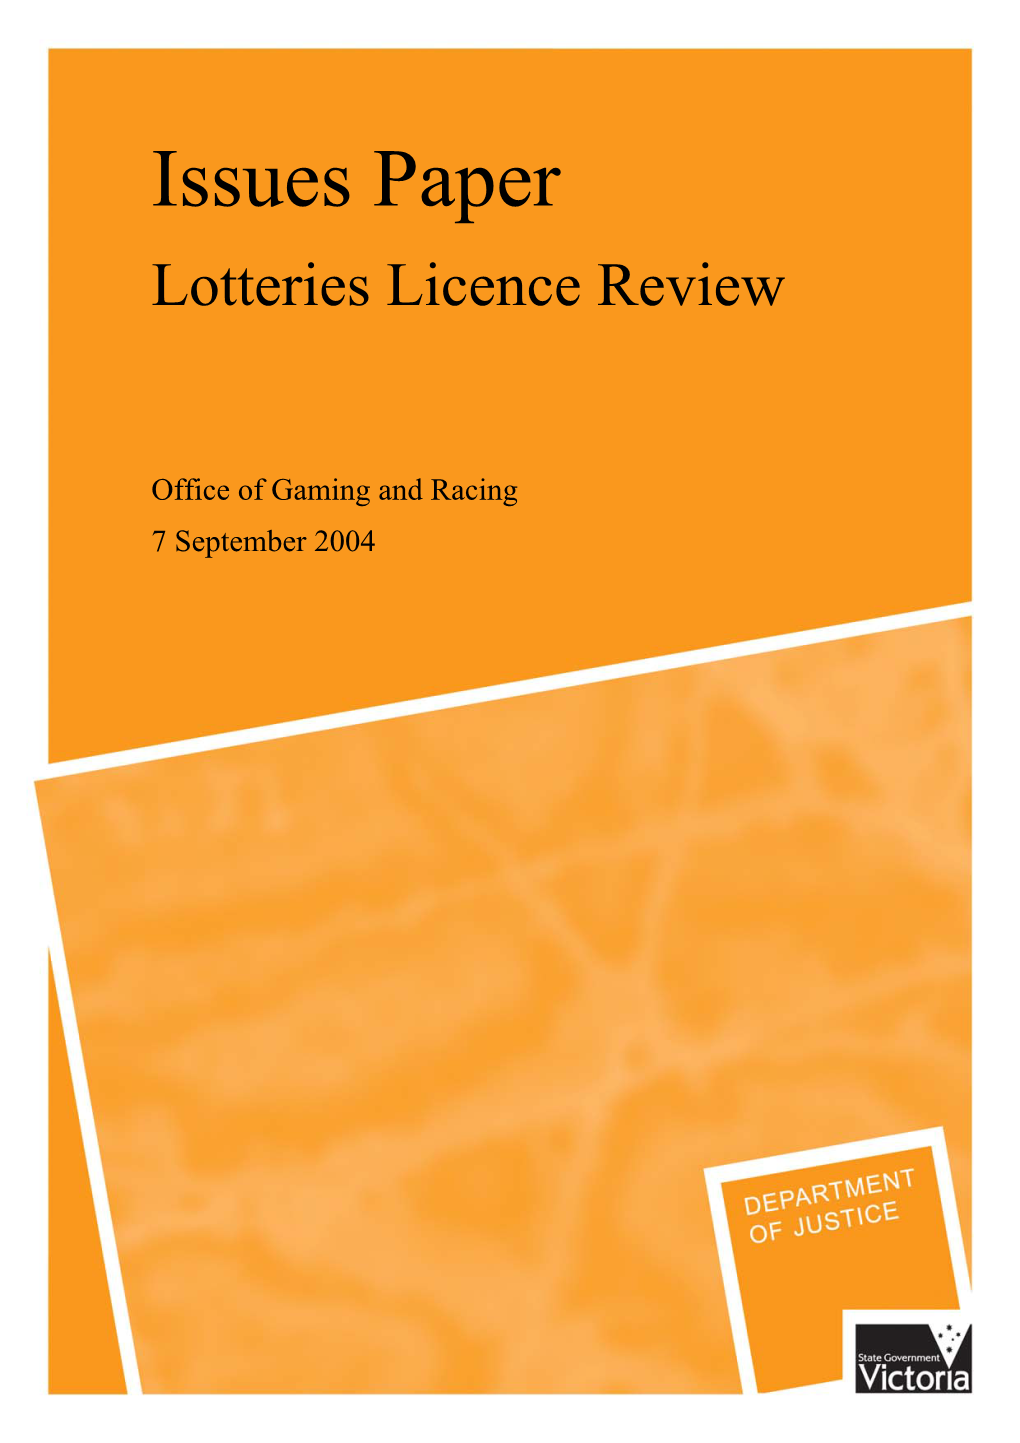 Issues Paper Lotteries Licence Review